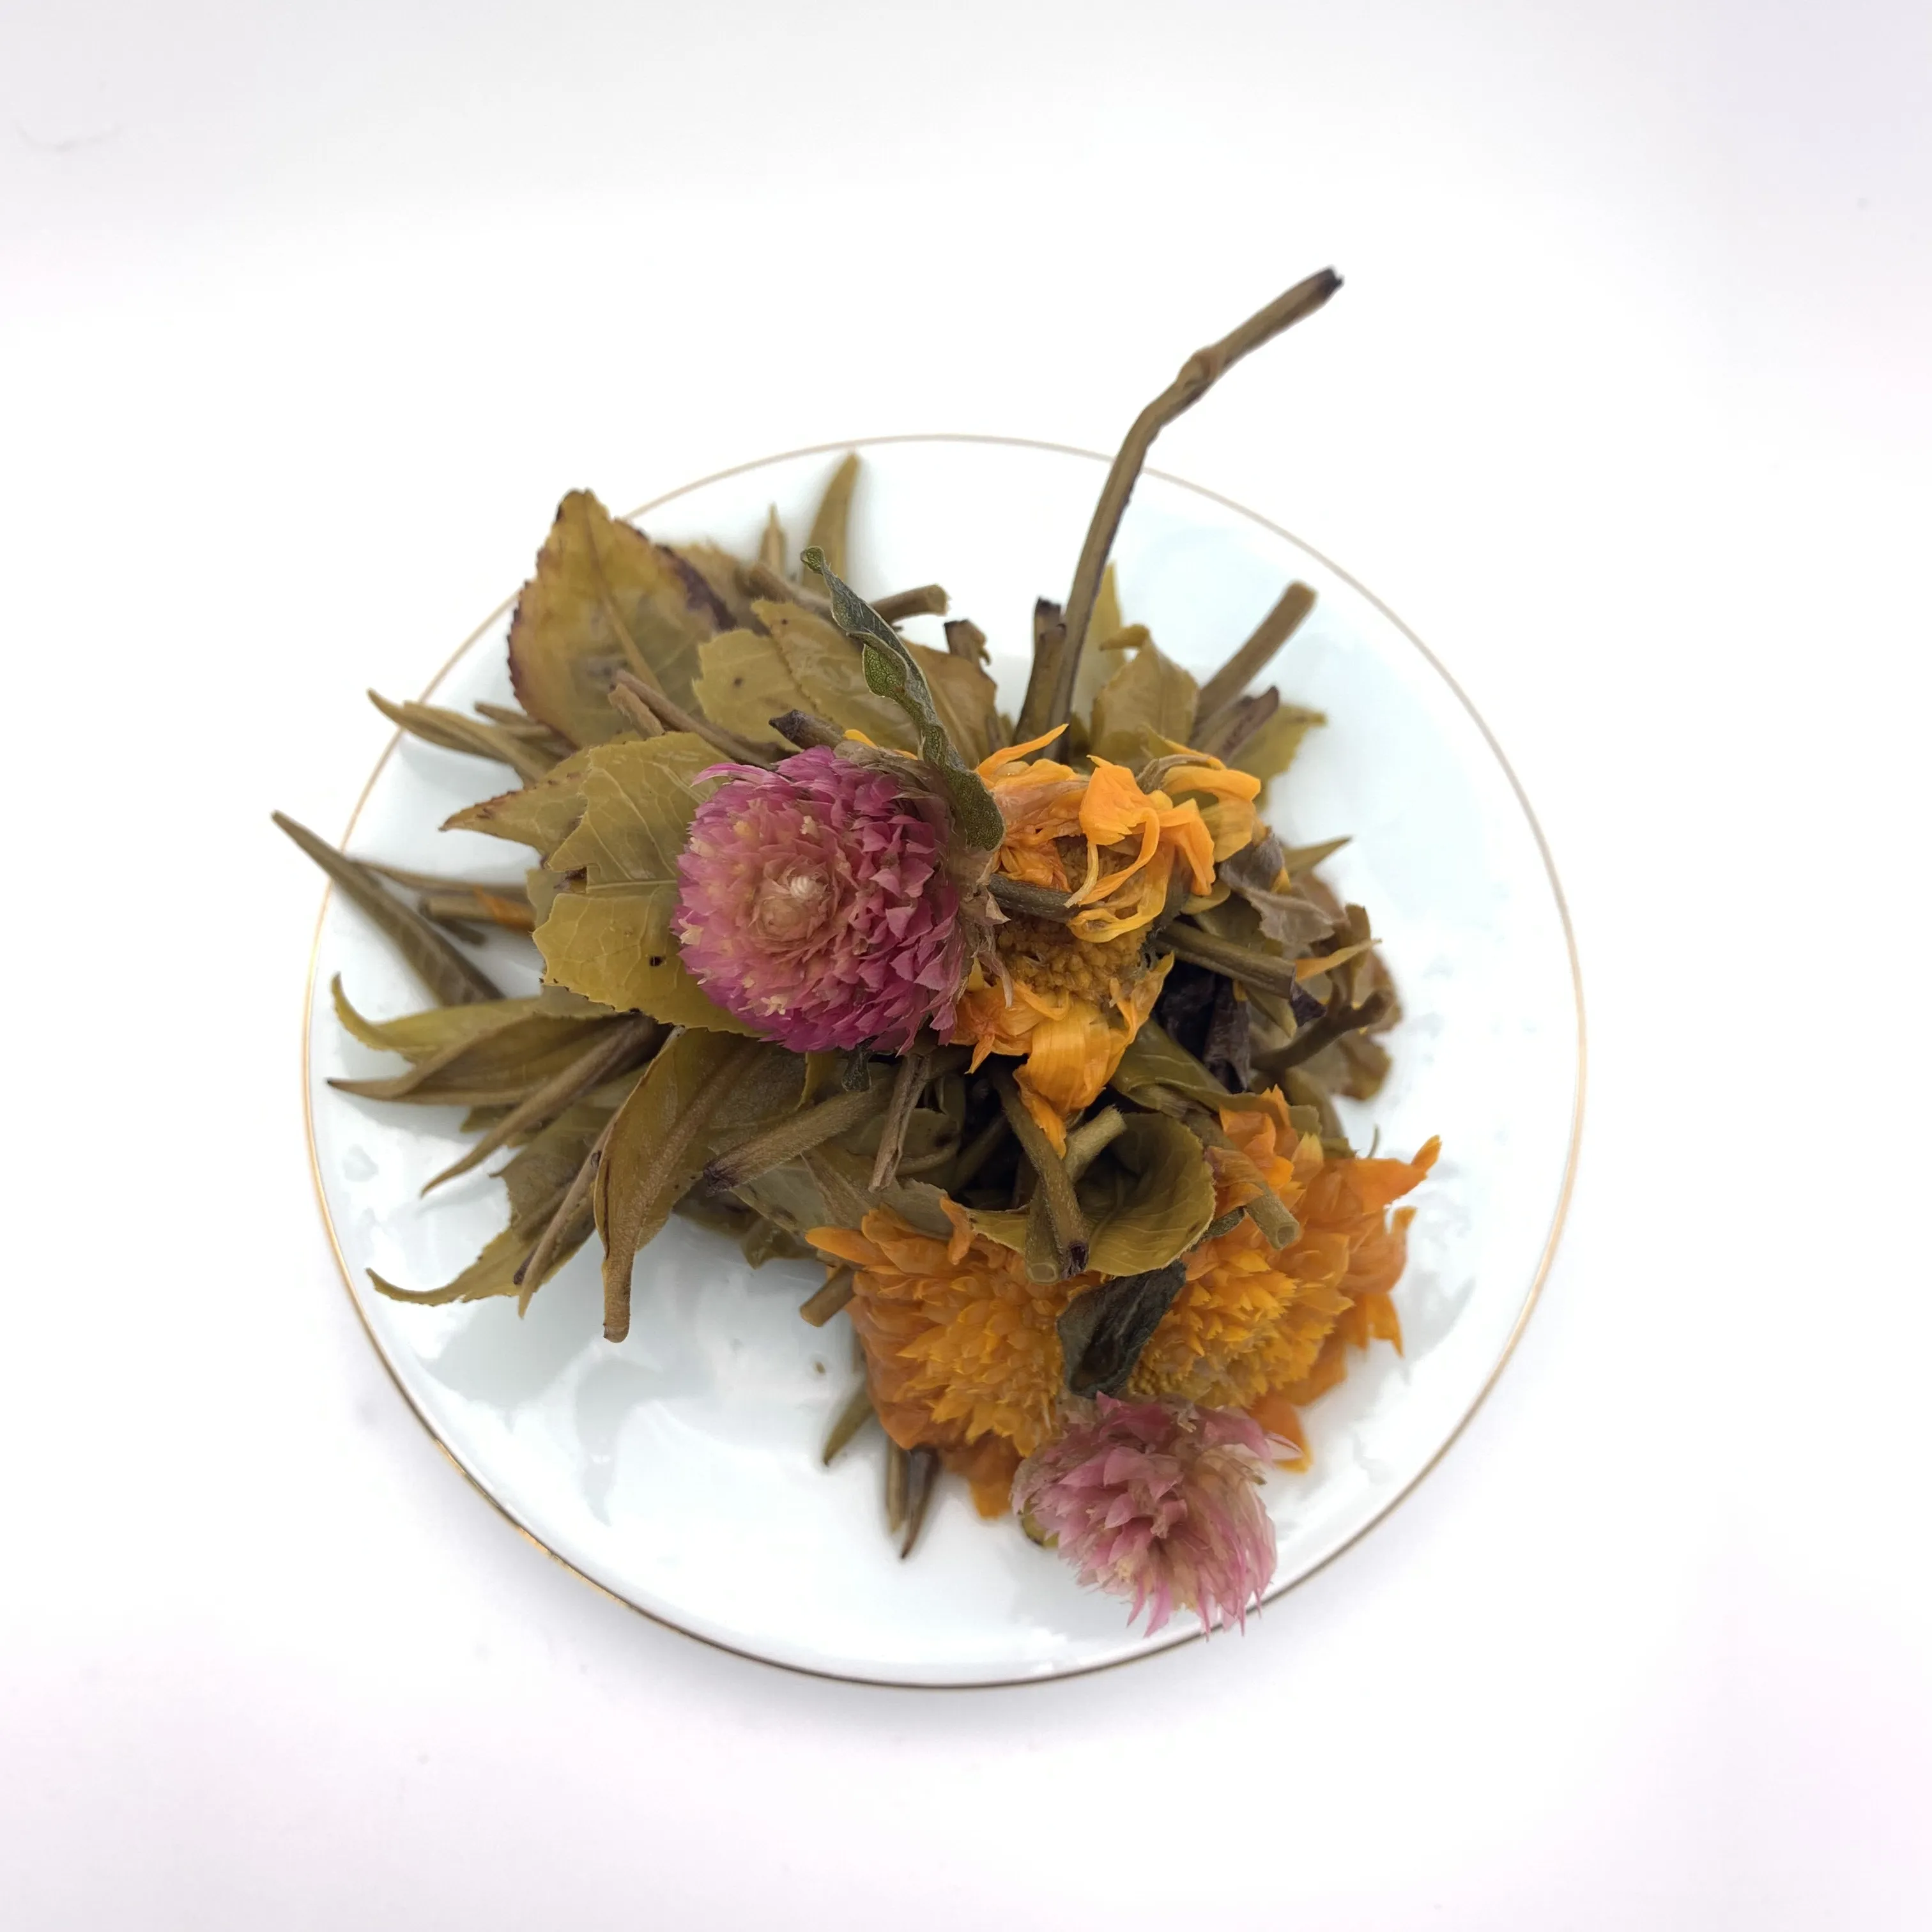 Chinese Special Blooming Tea High Aroma Healthy Flower Tea China Premium Jin Yuan Bao Special Craft Flower Green Tea Green Bloom